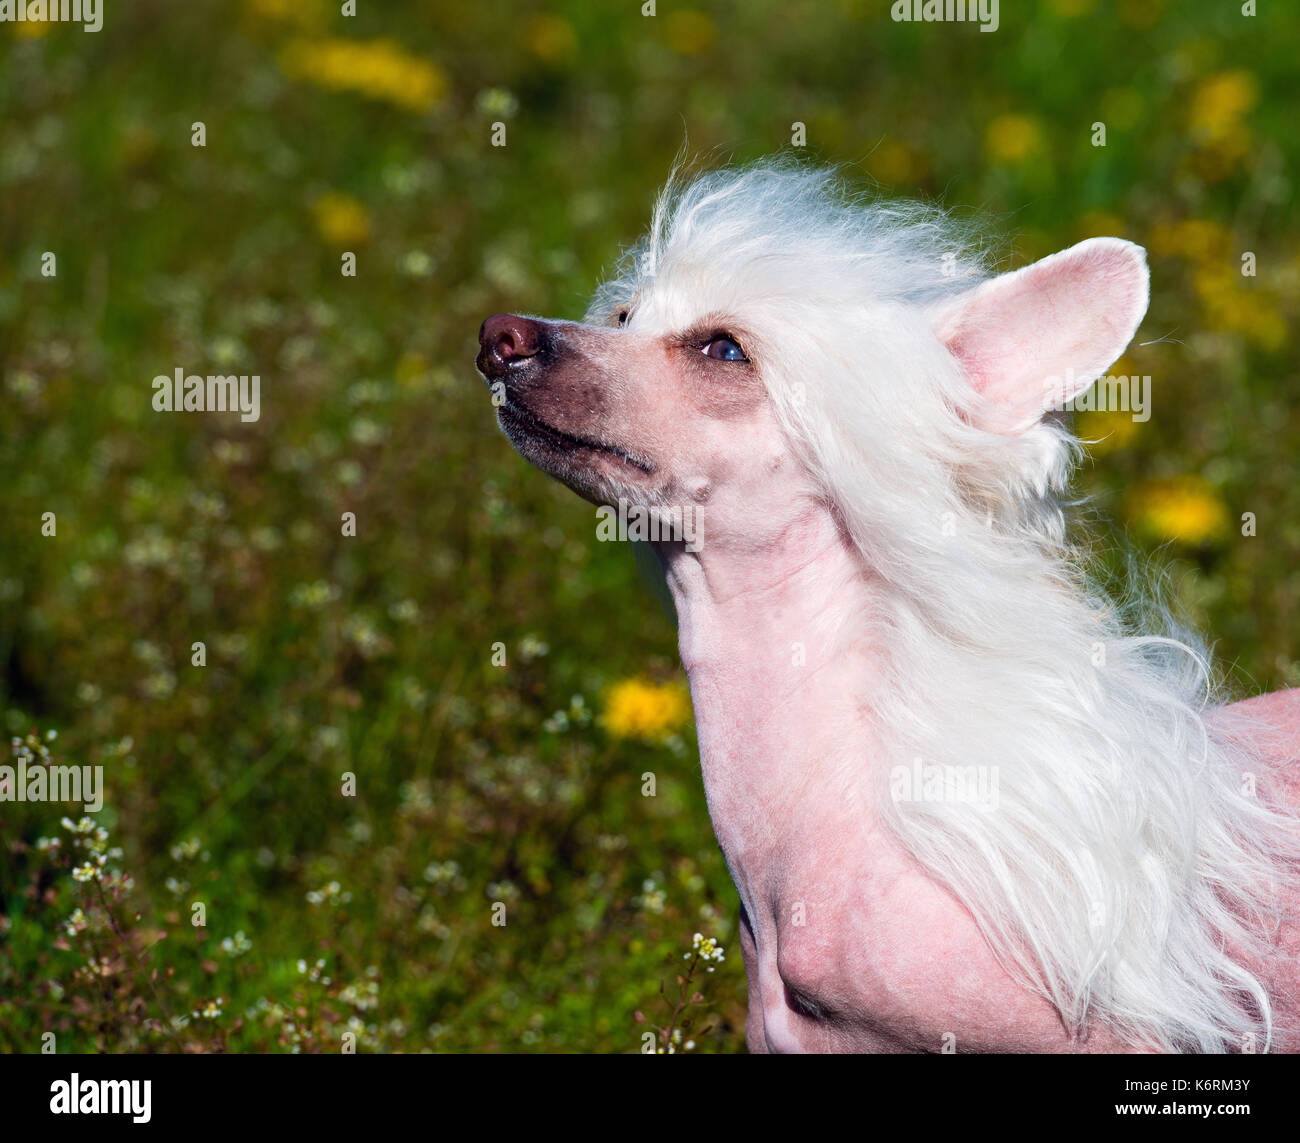 Chinese crested dog portrait. The Chinese crested dog walks on the grass of the park. Stock Photo